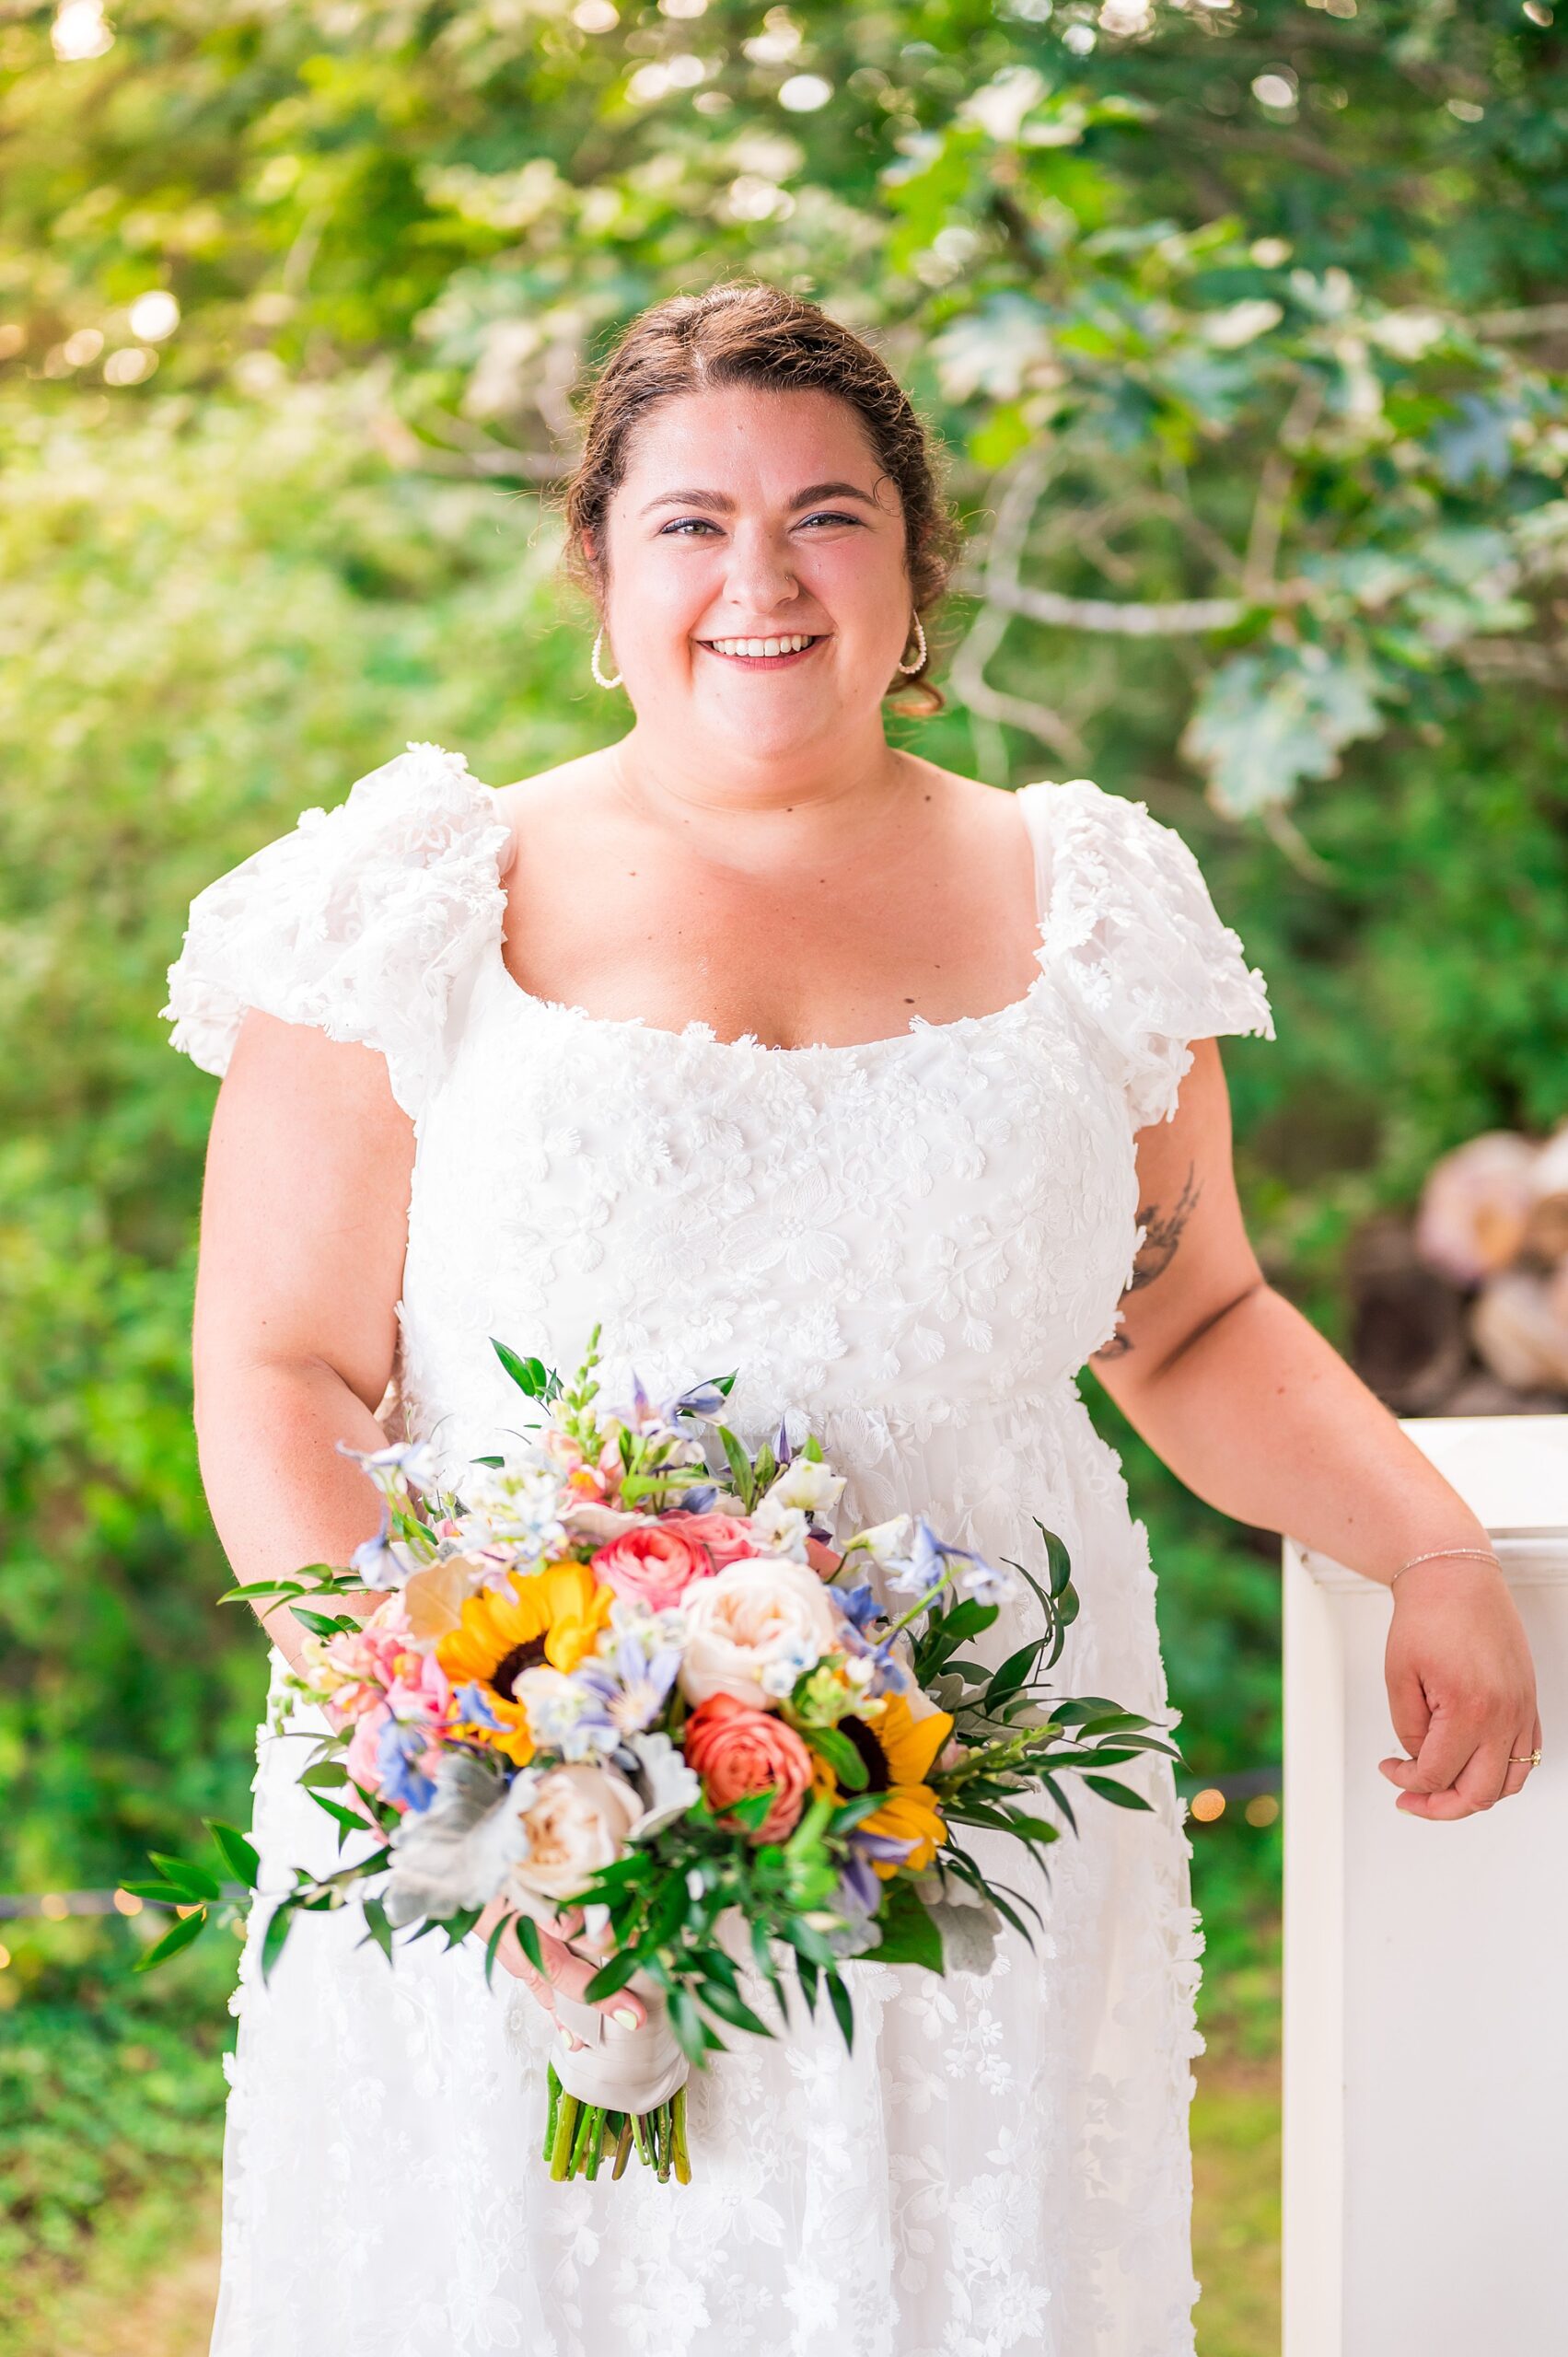 Bridal portraits from Manchester by the Sea Wedding